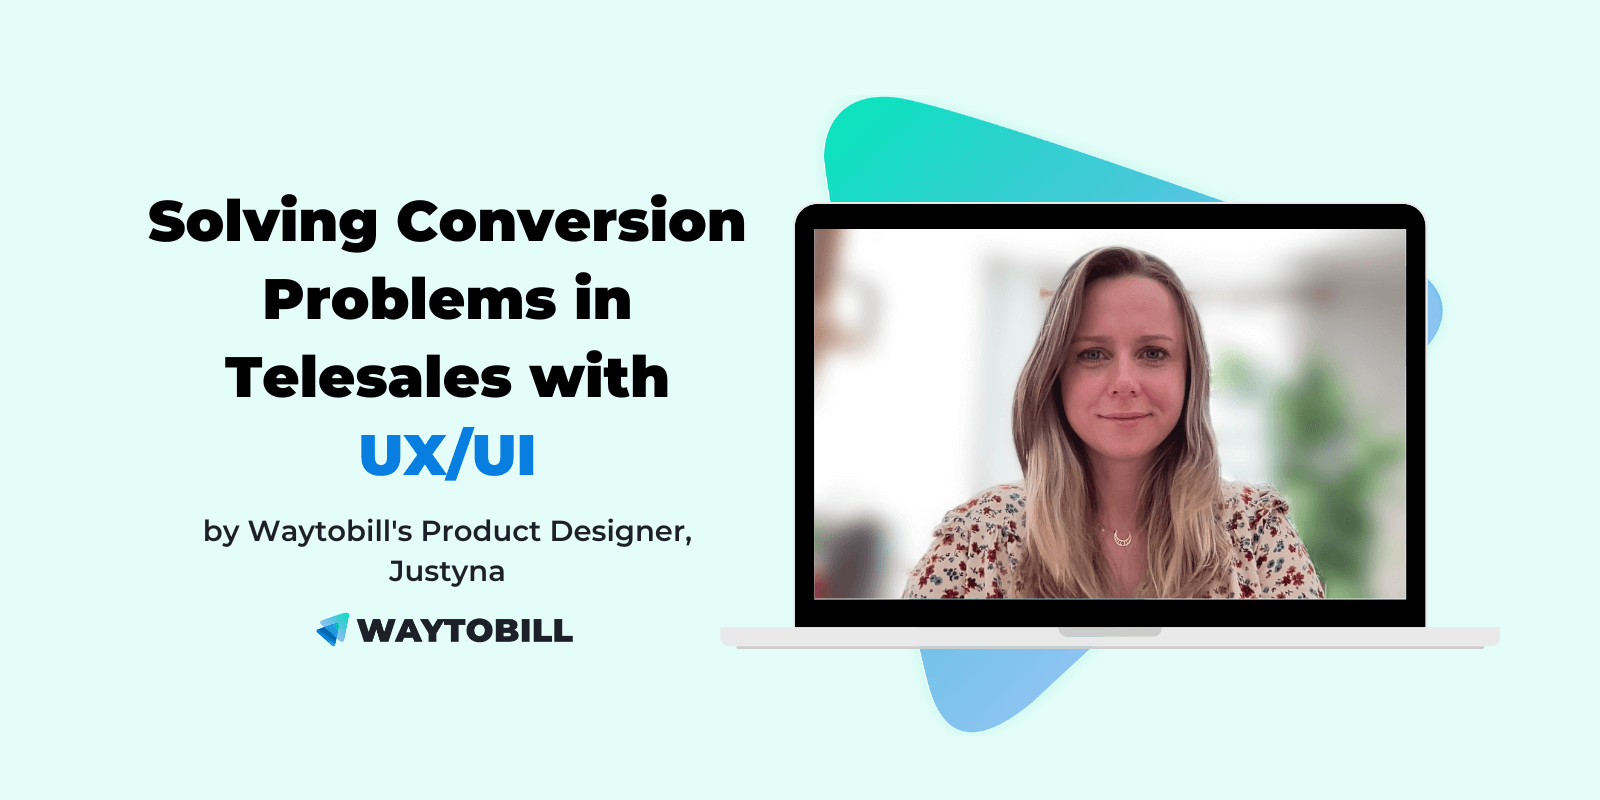 Solving Conversion Problems in Telesales with UX&UI